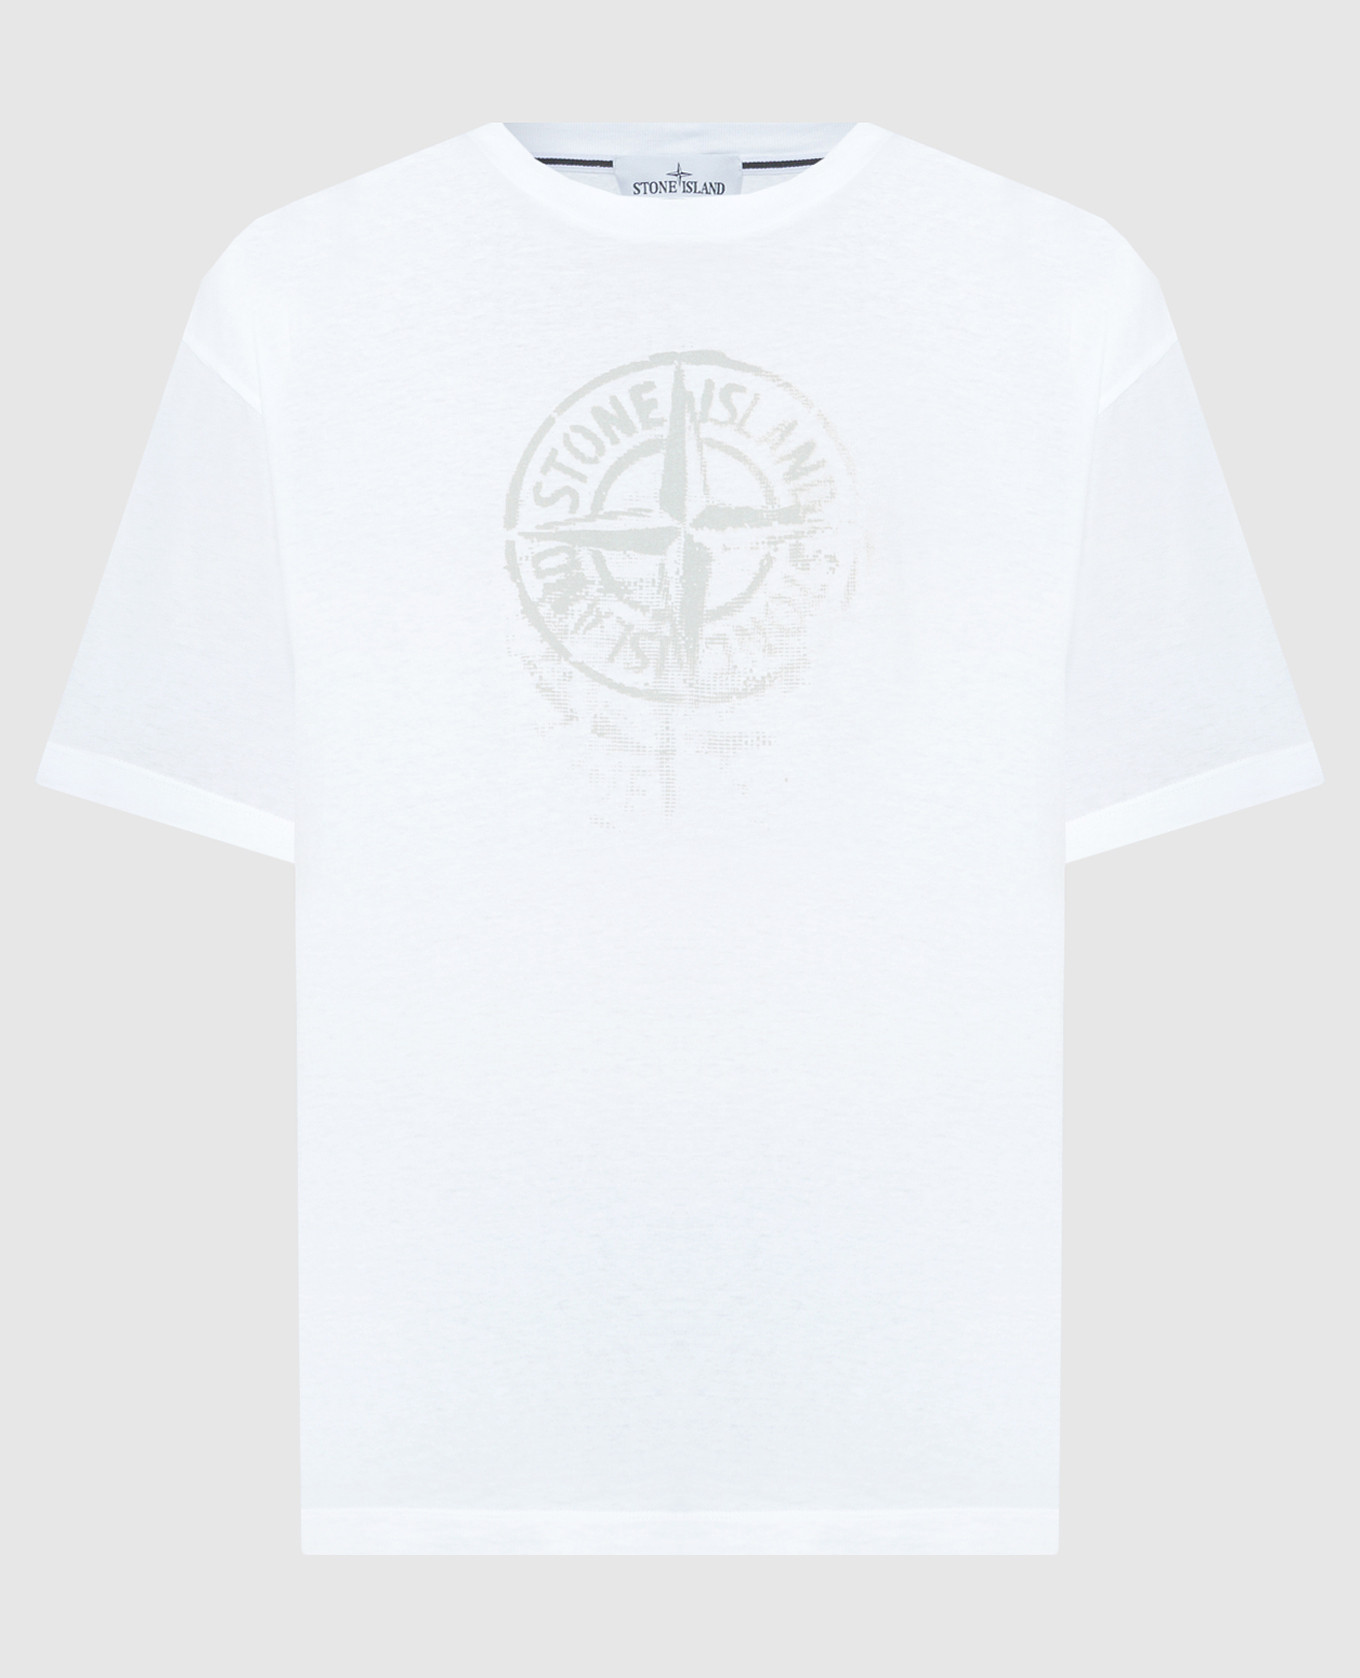 White t-shirt with Stamp One print